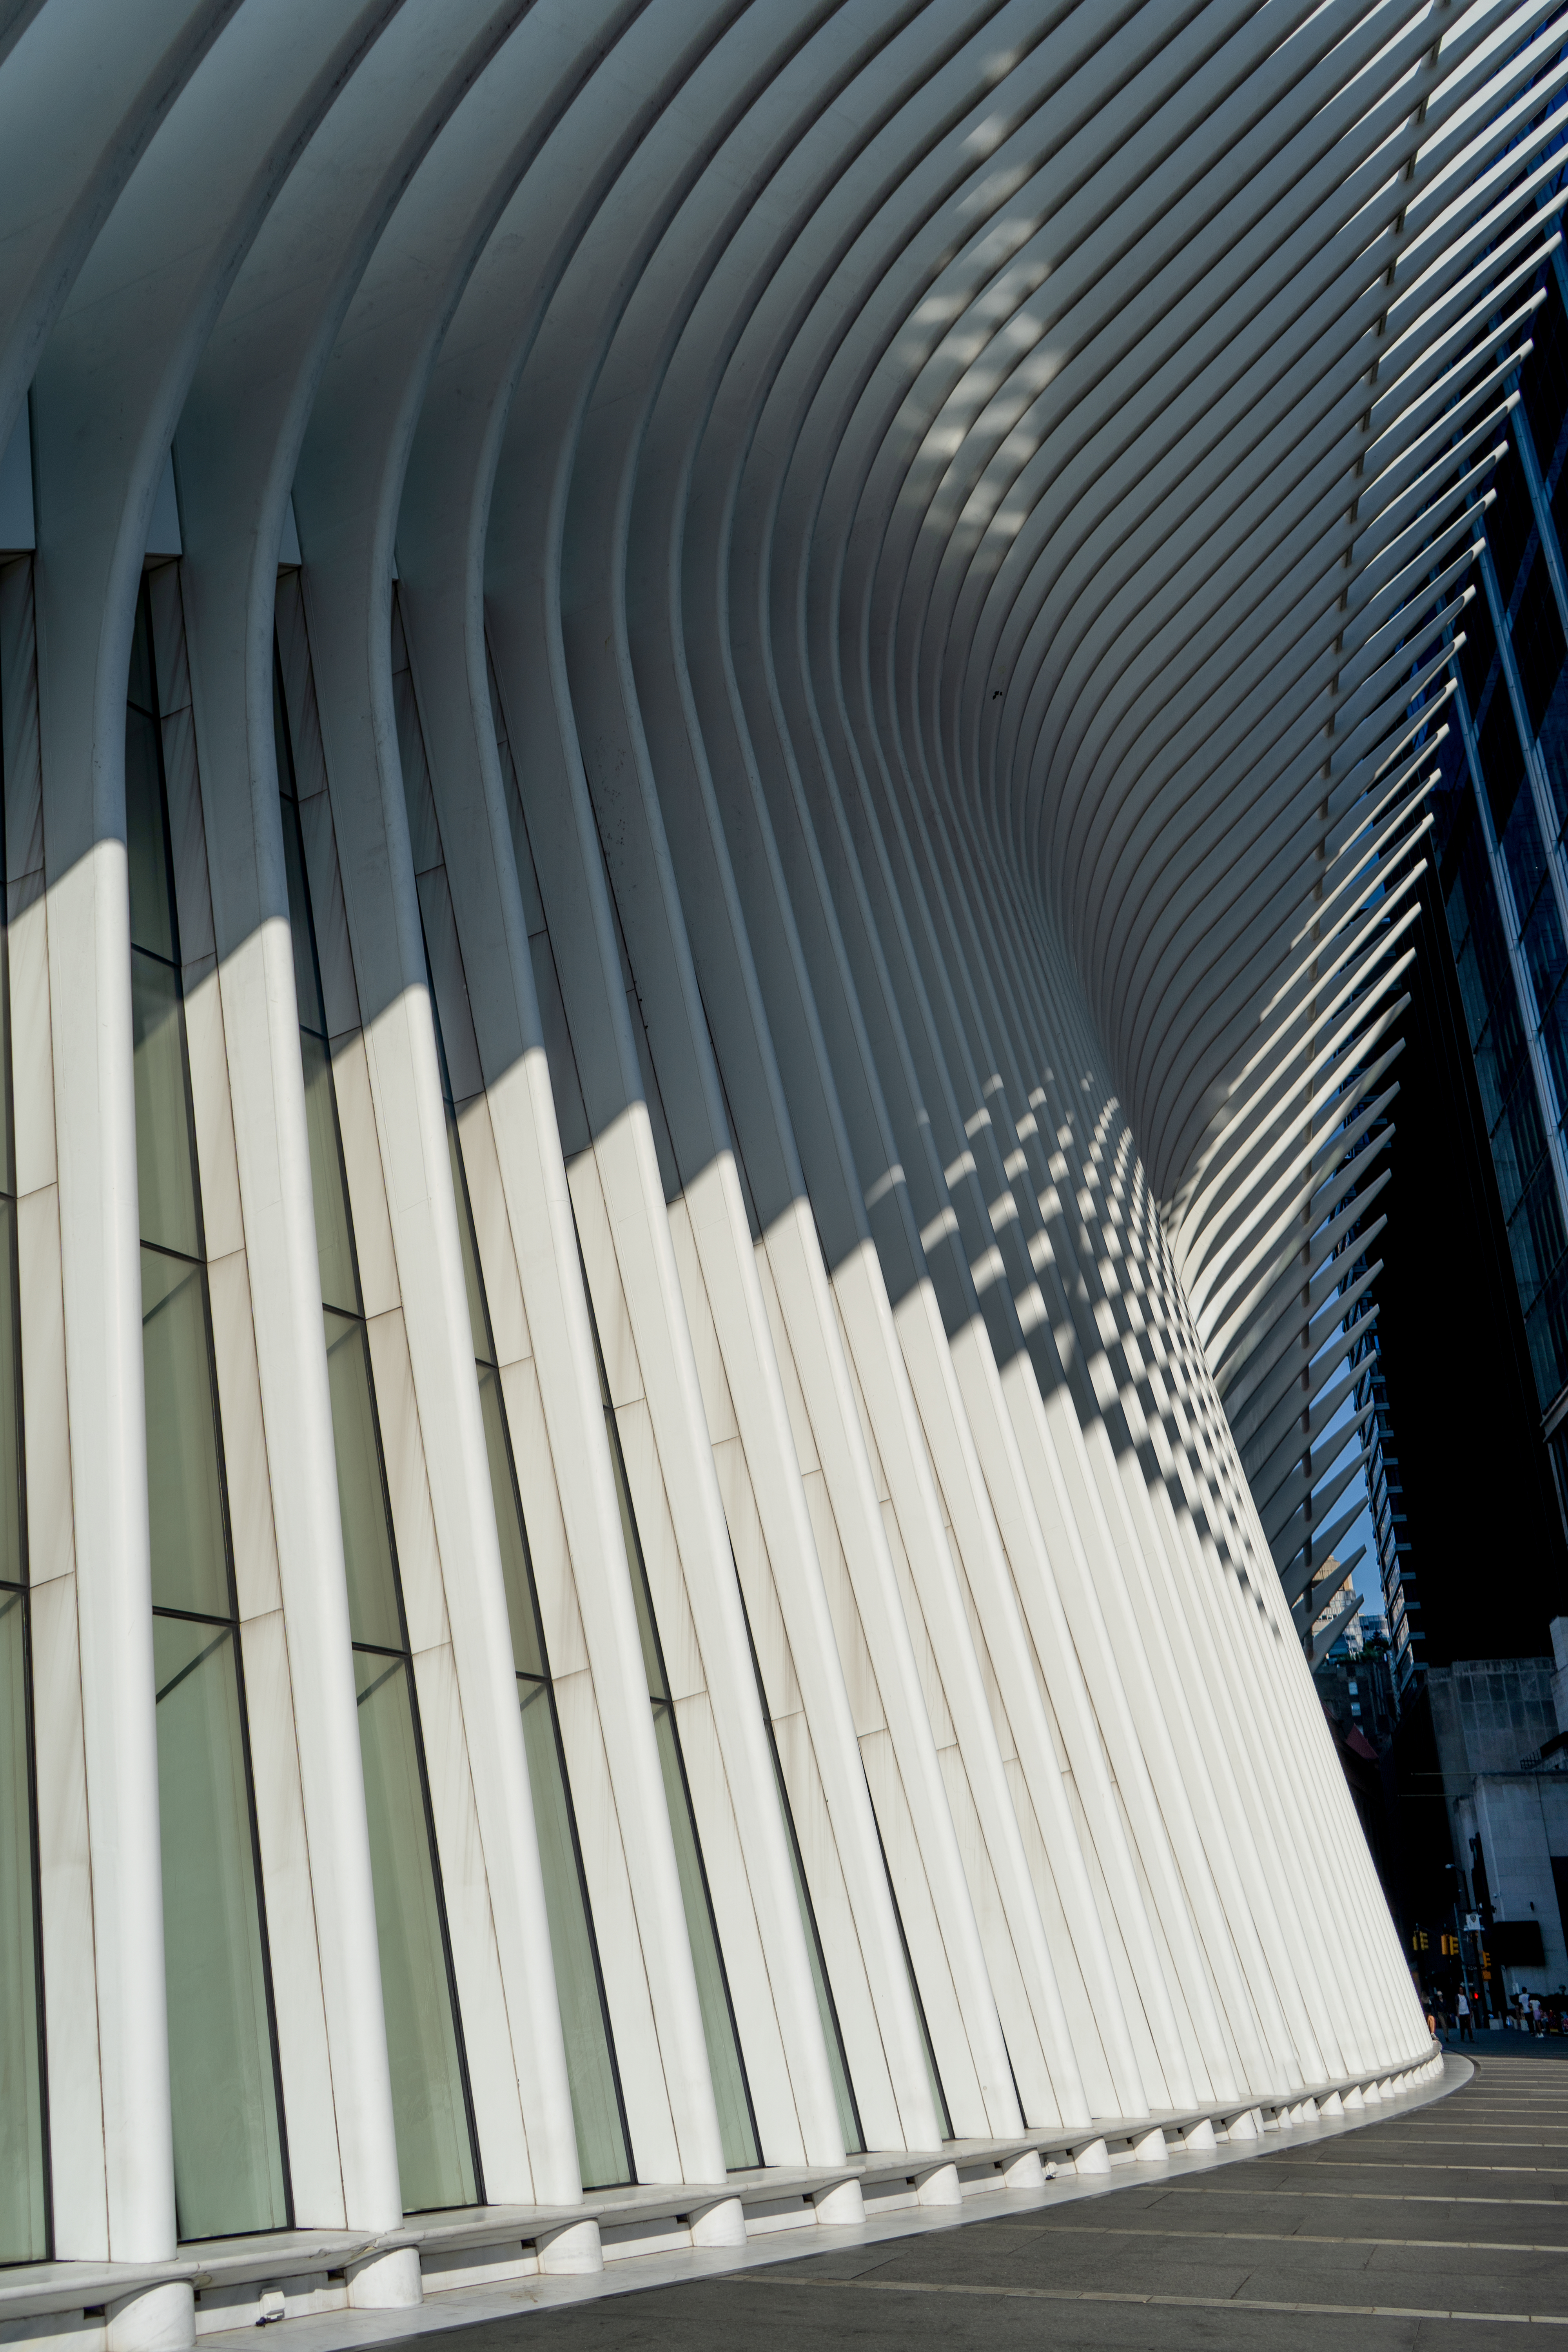 A side view of Manhattan's Oculus building in the afternoon